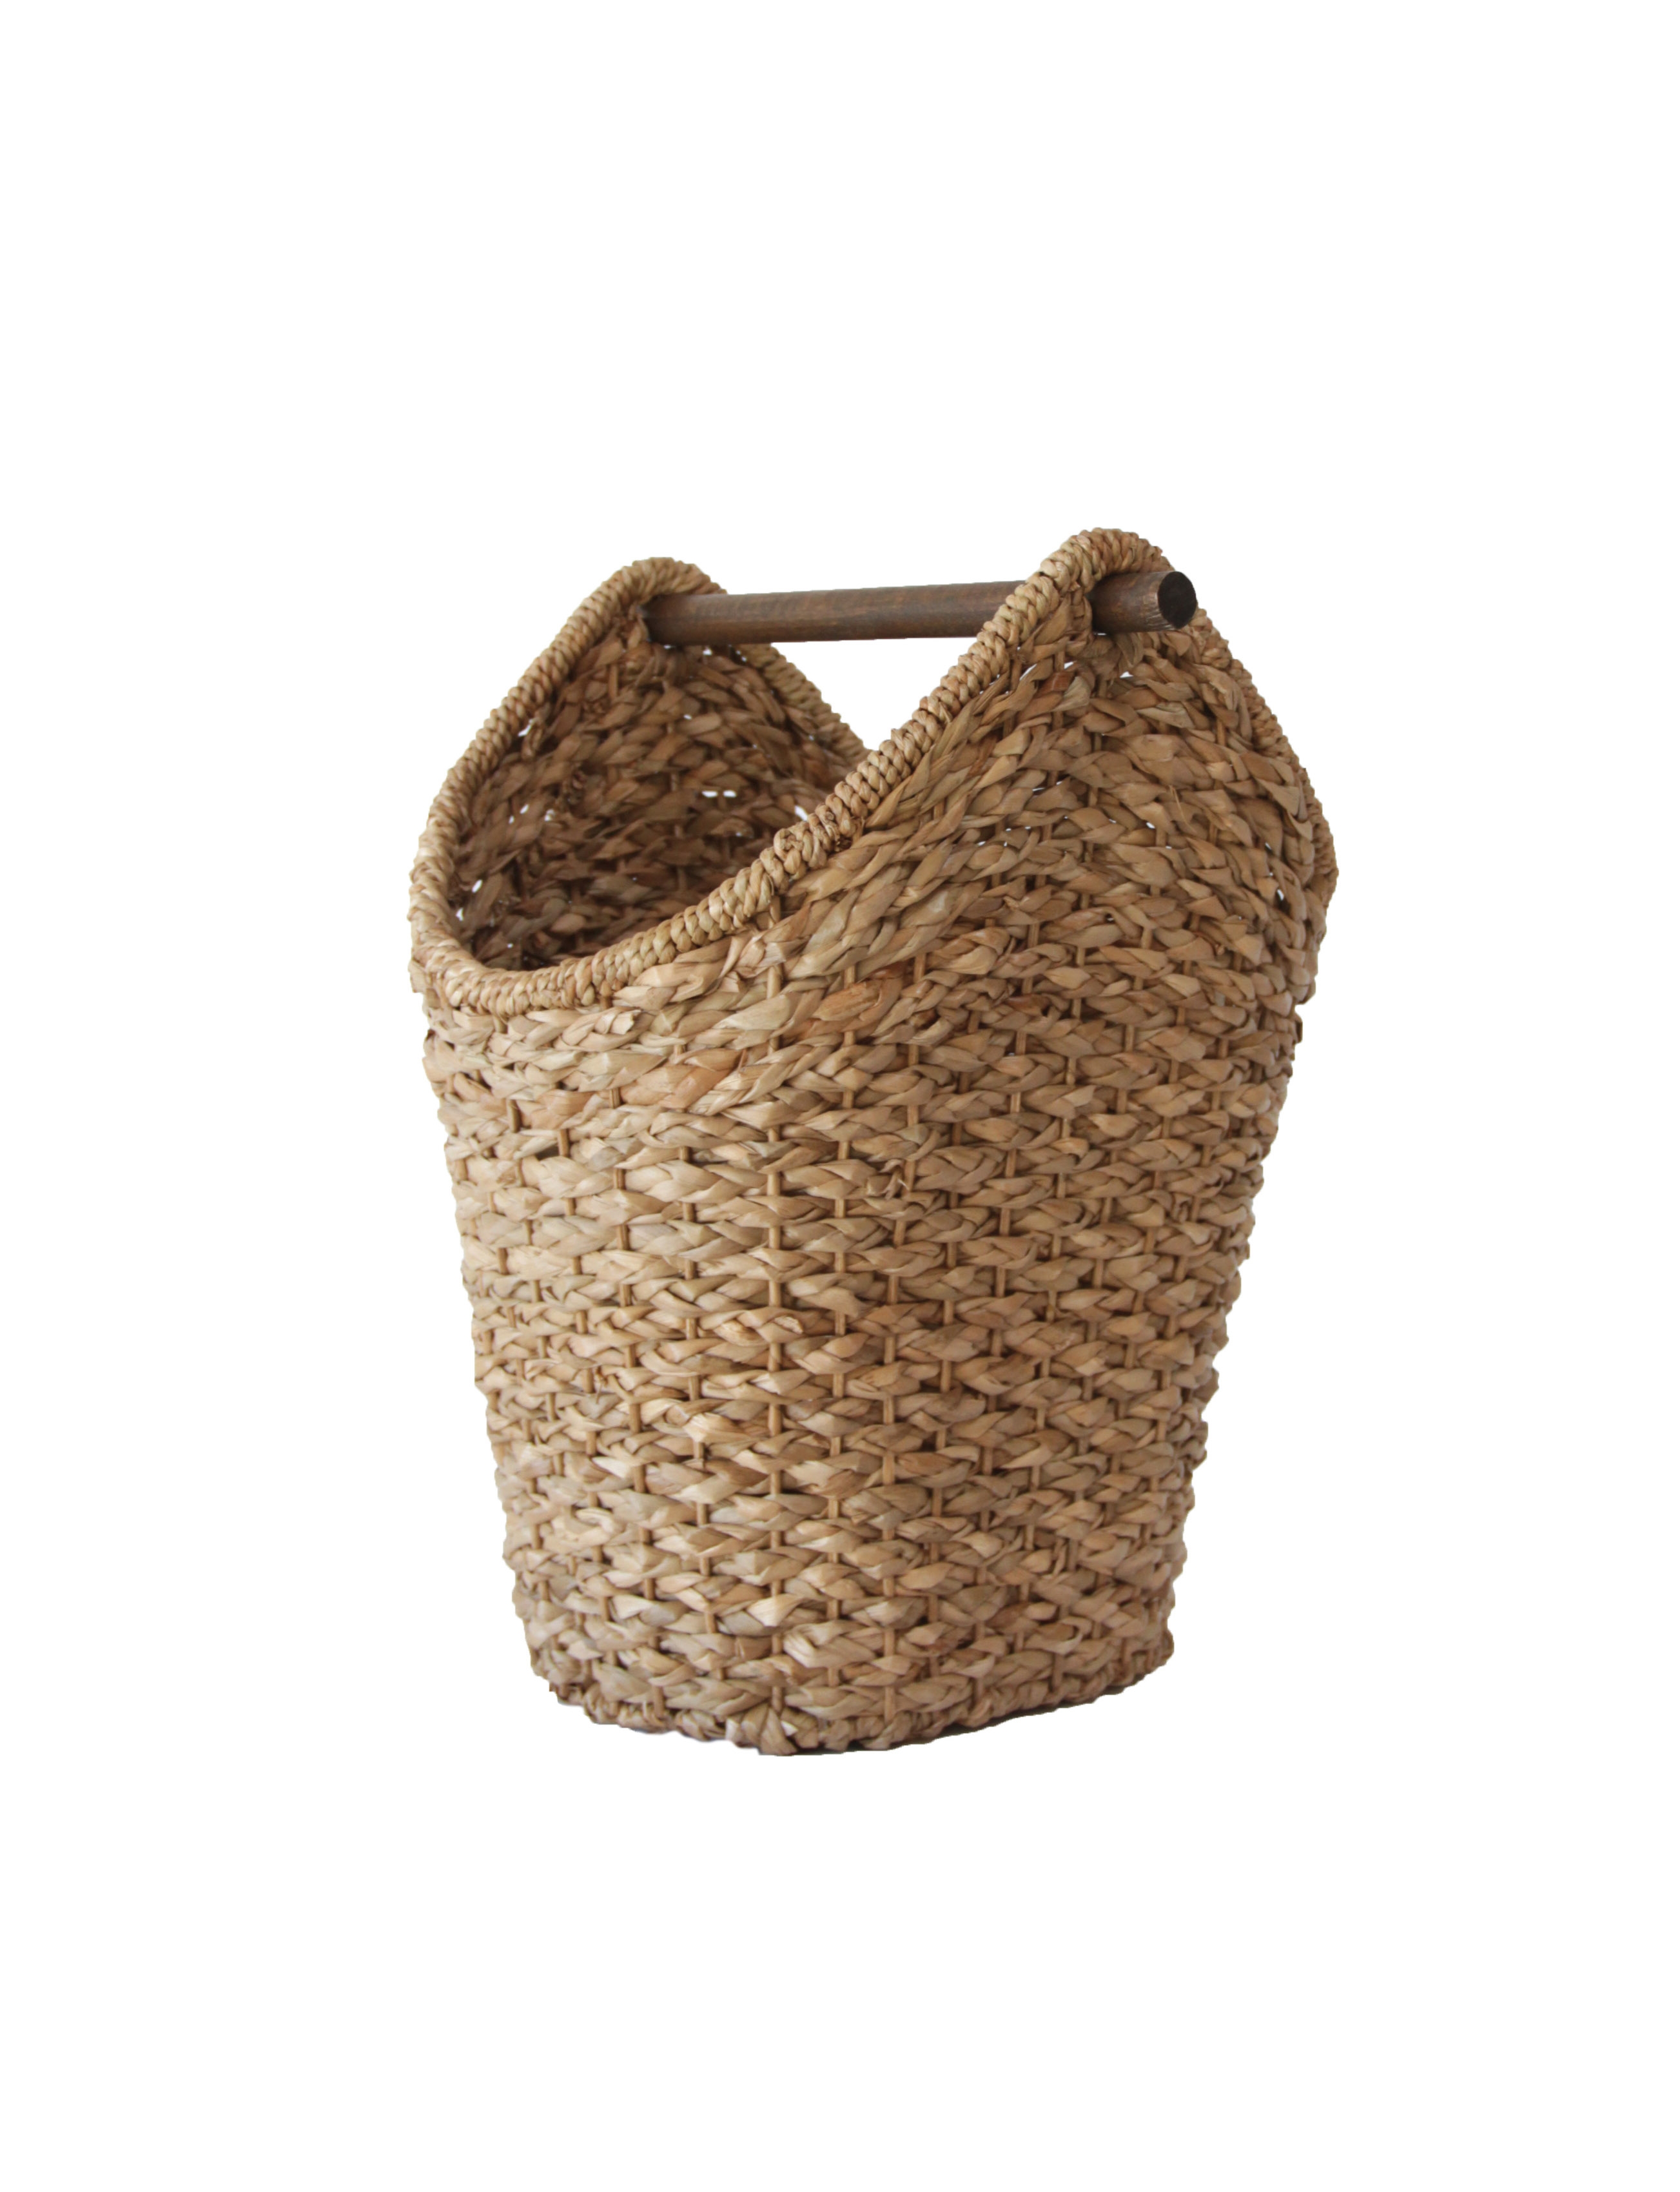 Bankuan Braided Oval Toilet Paper Basket with Wood Bar - Image 0